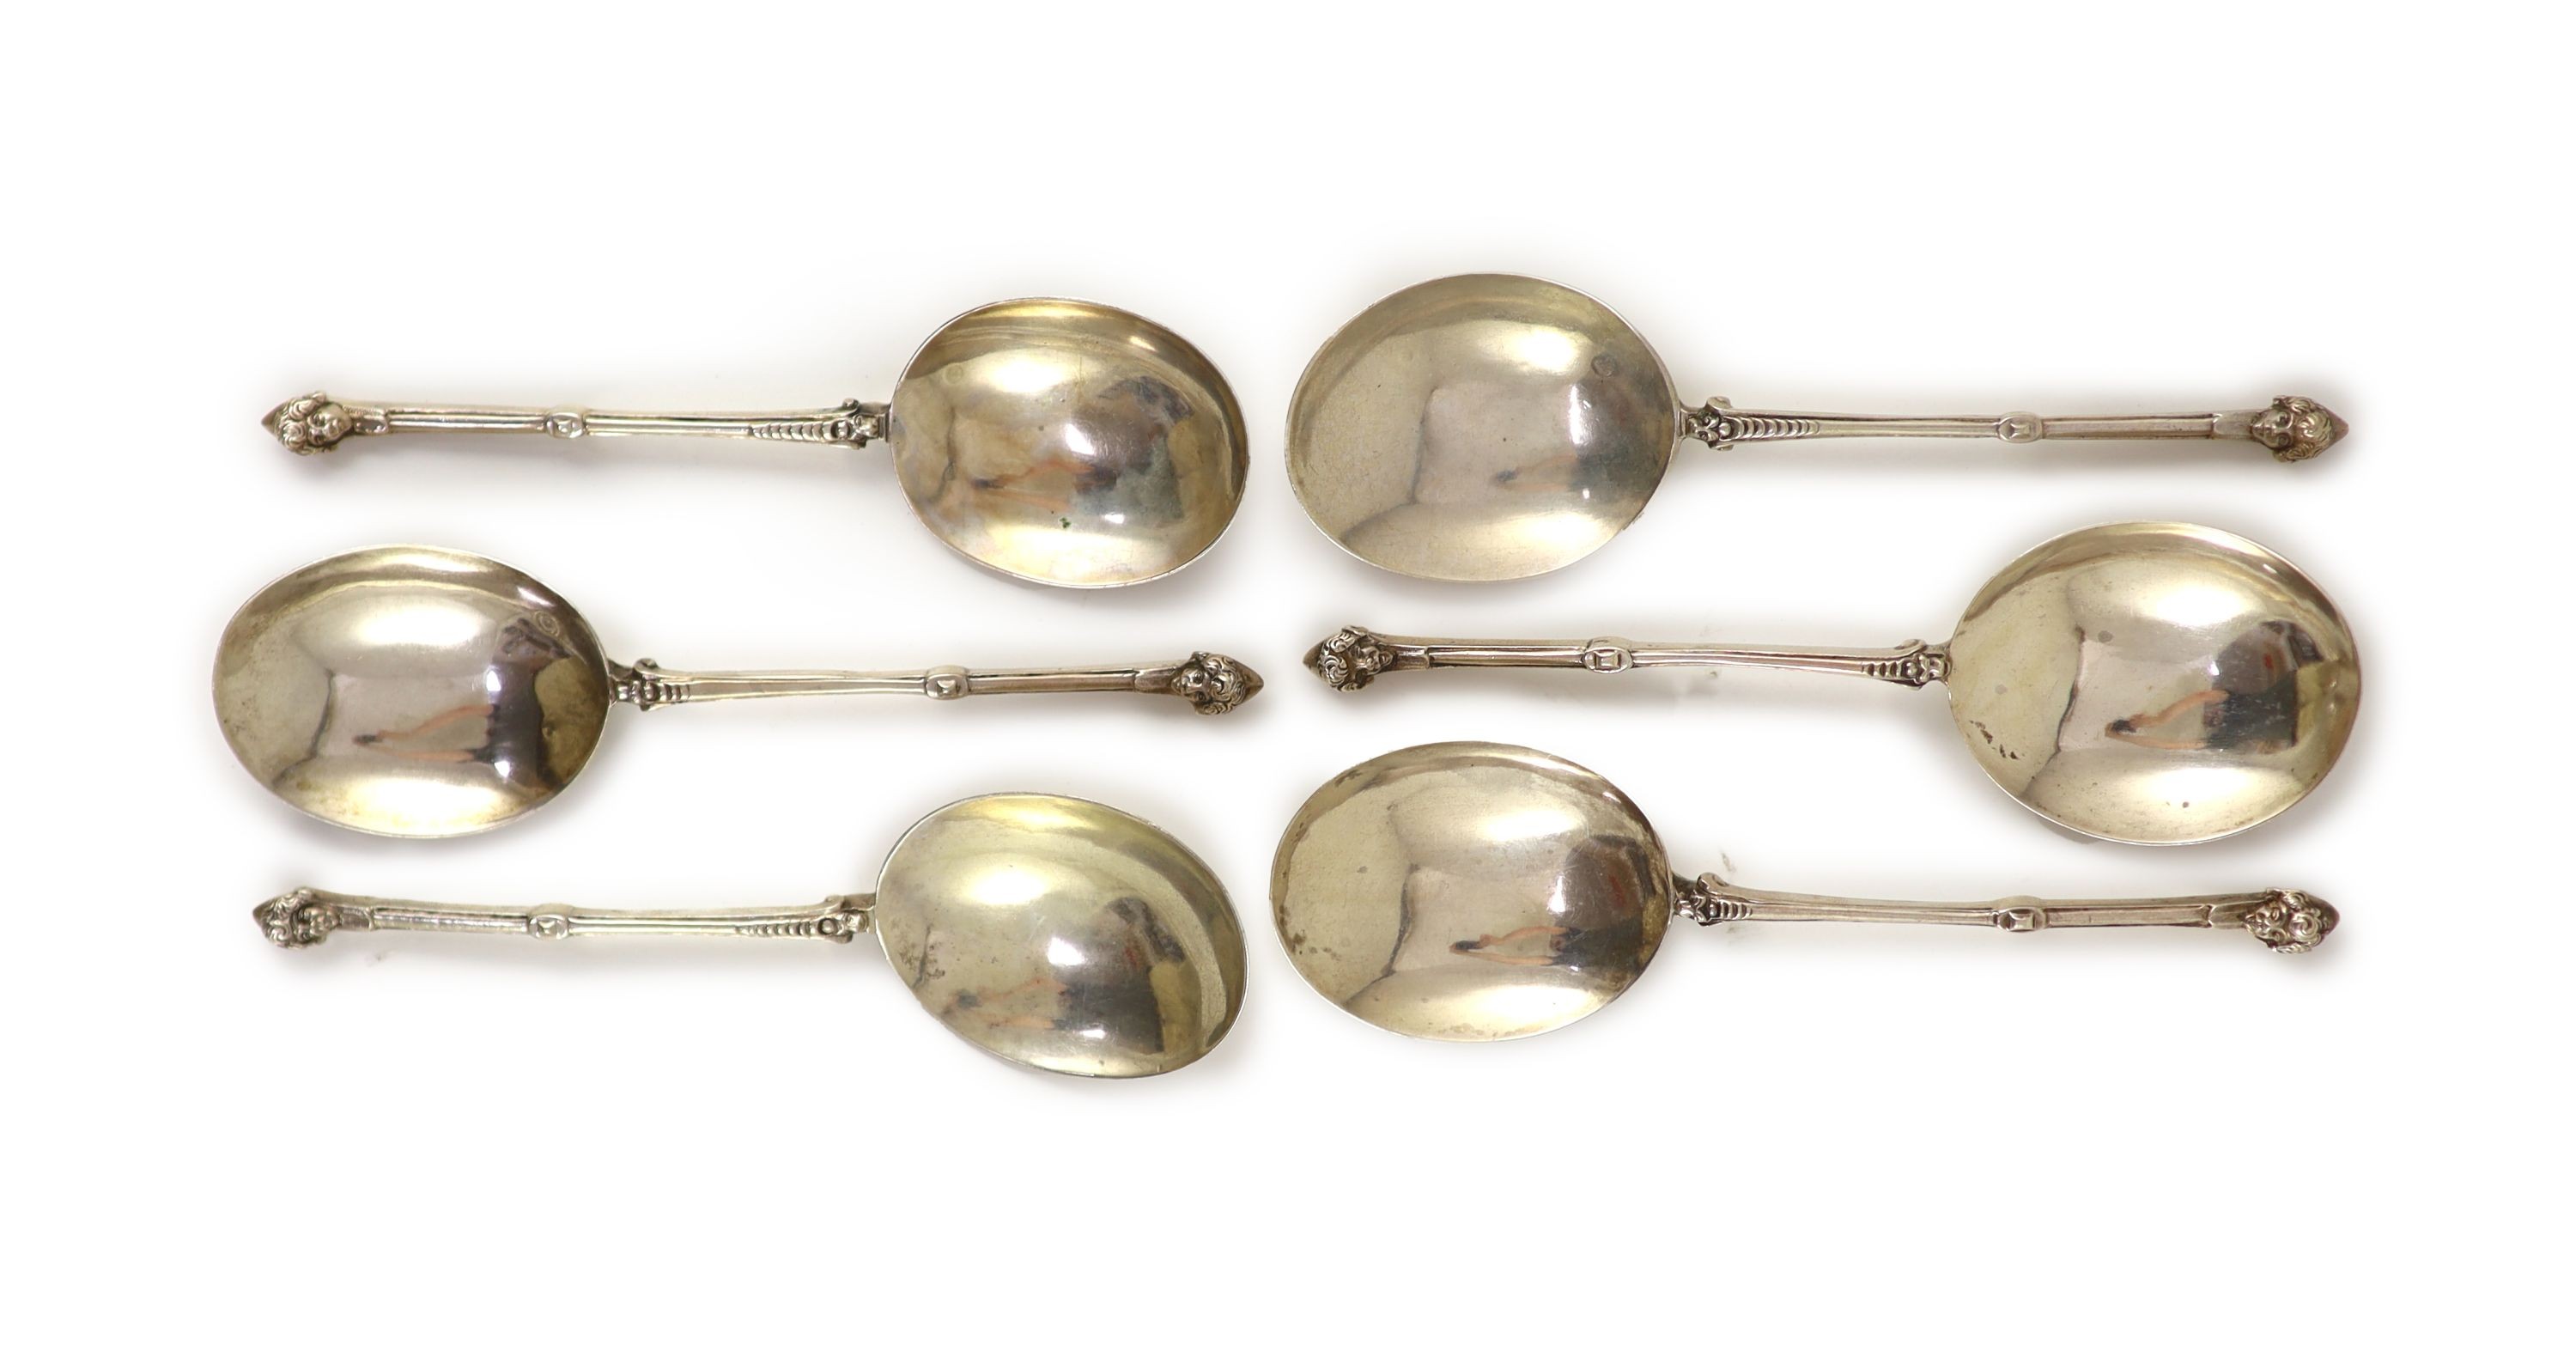 A harlequin set of six 19th century Dutch? silver baptismal spoons, some engraved arms of the Kingdom of the Netherlands